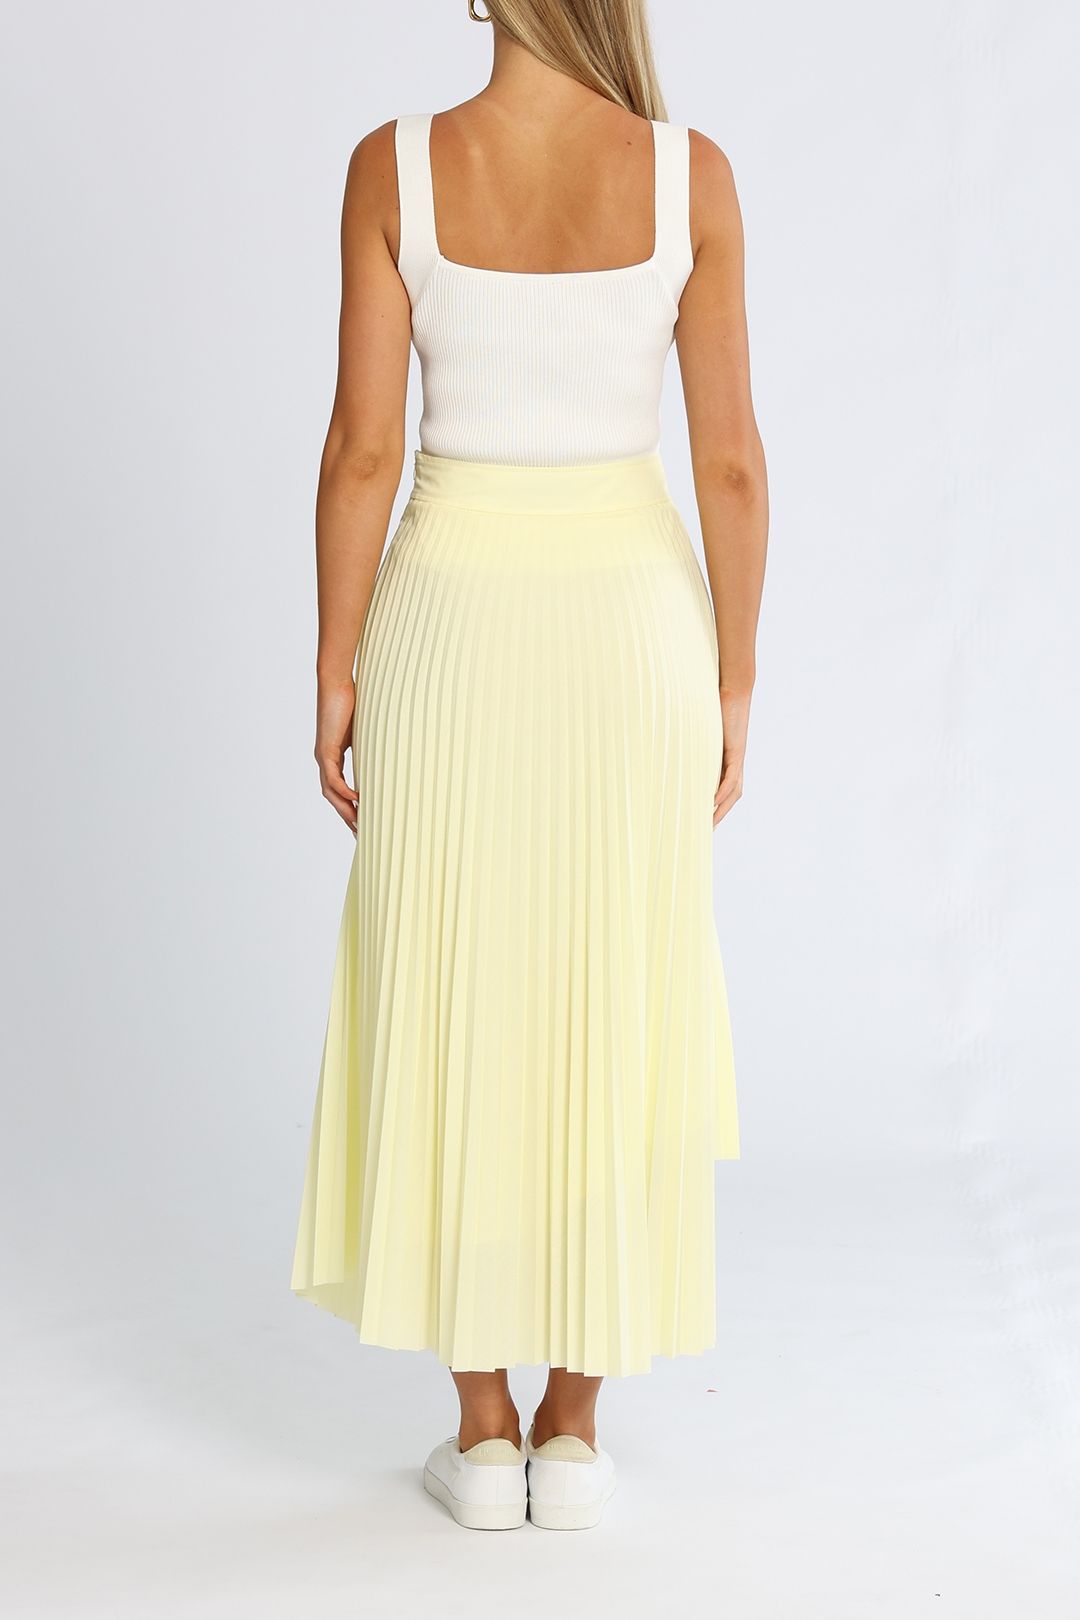 Camilla and Marc Miller Skirt Yellow